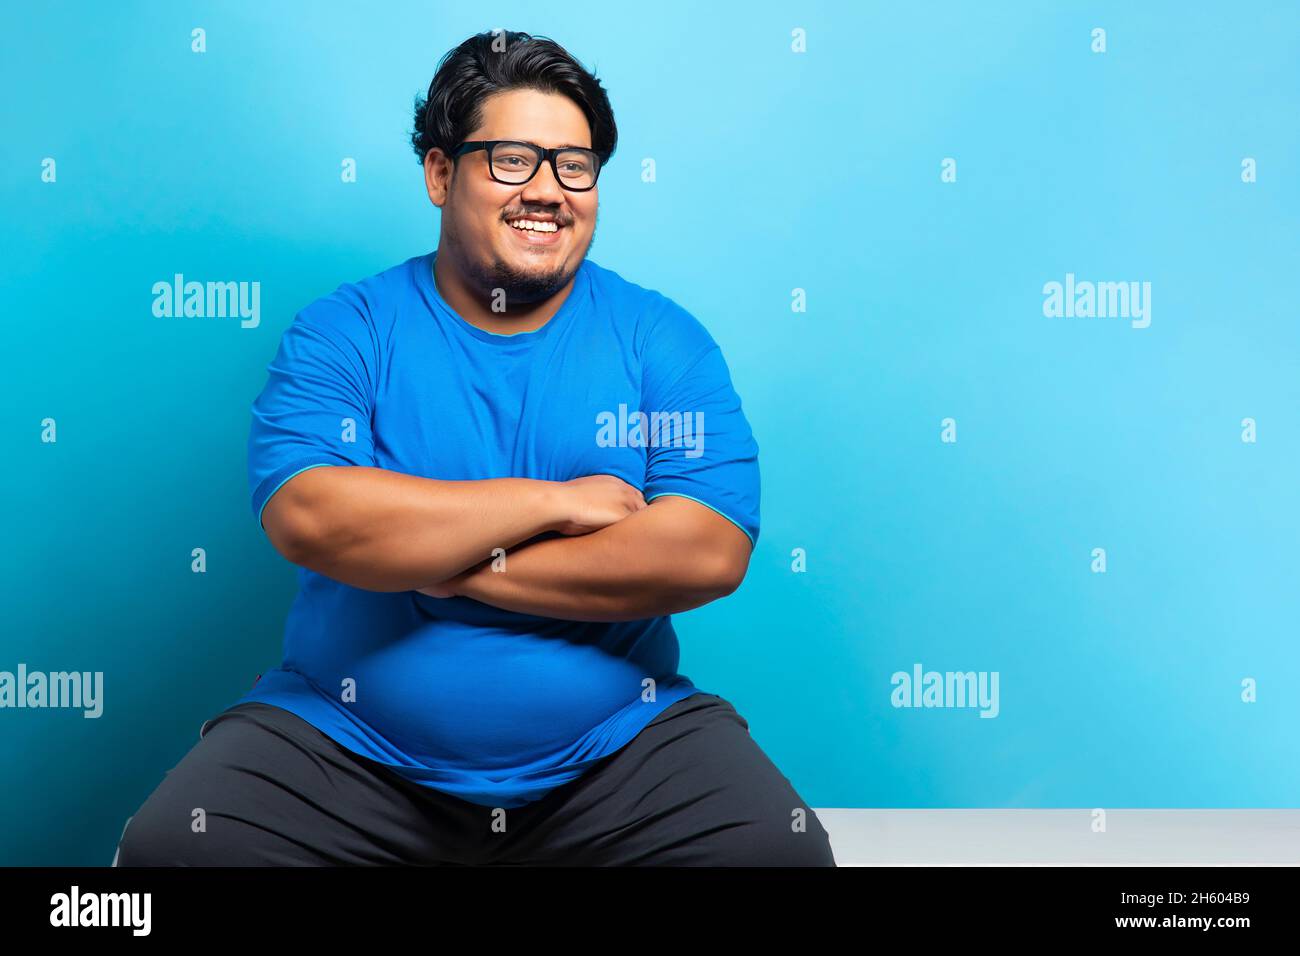 Portrait of a fat man wearing eyeglasses smiling while sitting cross armed. Stock Photo